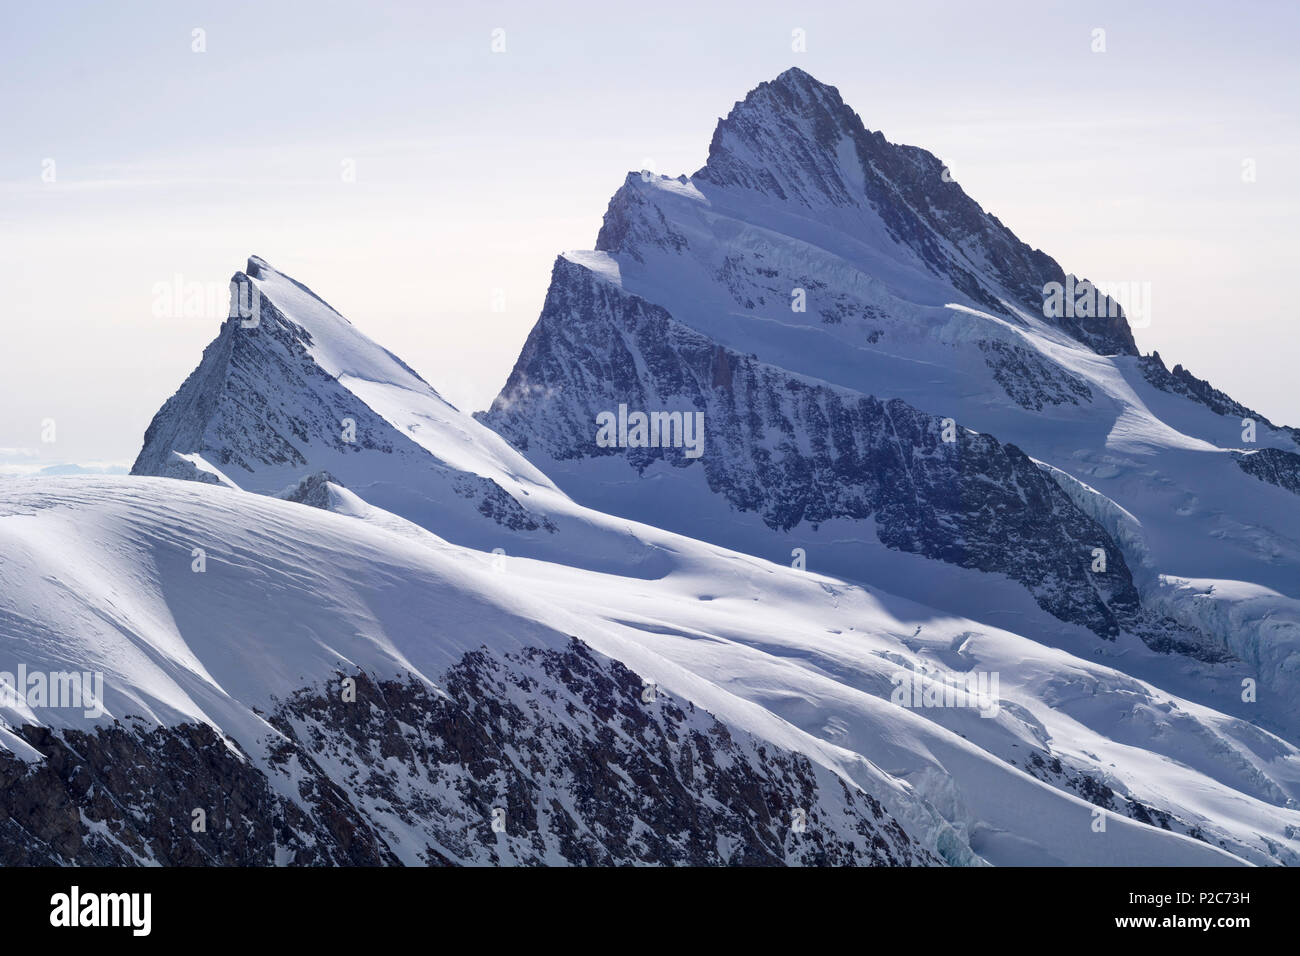 The Finsteraarhorn with its smaller neighbour Agassizhorn, Bernese Alps, cantons of Valais and Bern, Switzerland Stock Photo